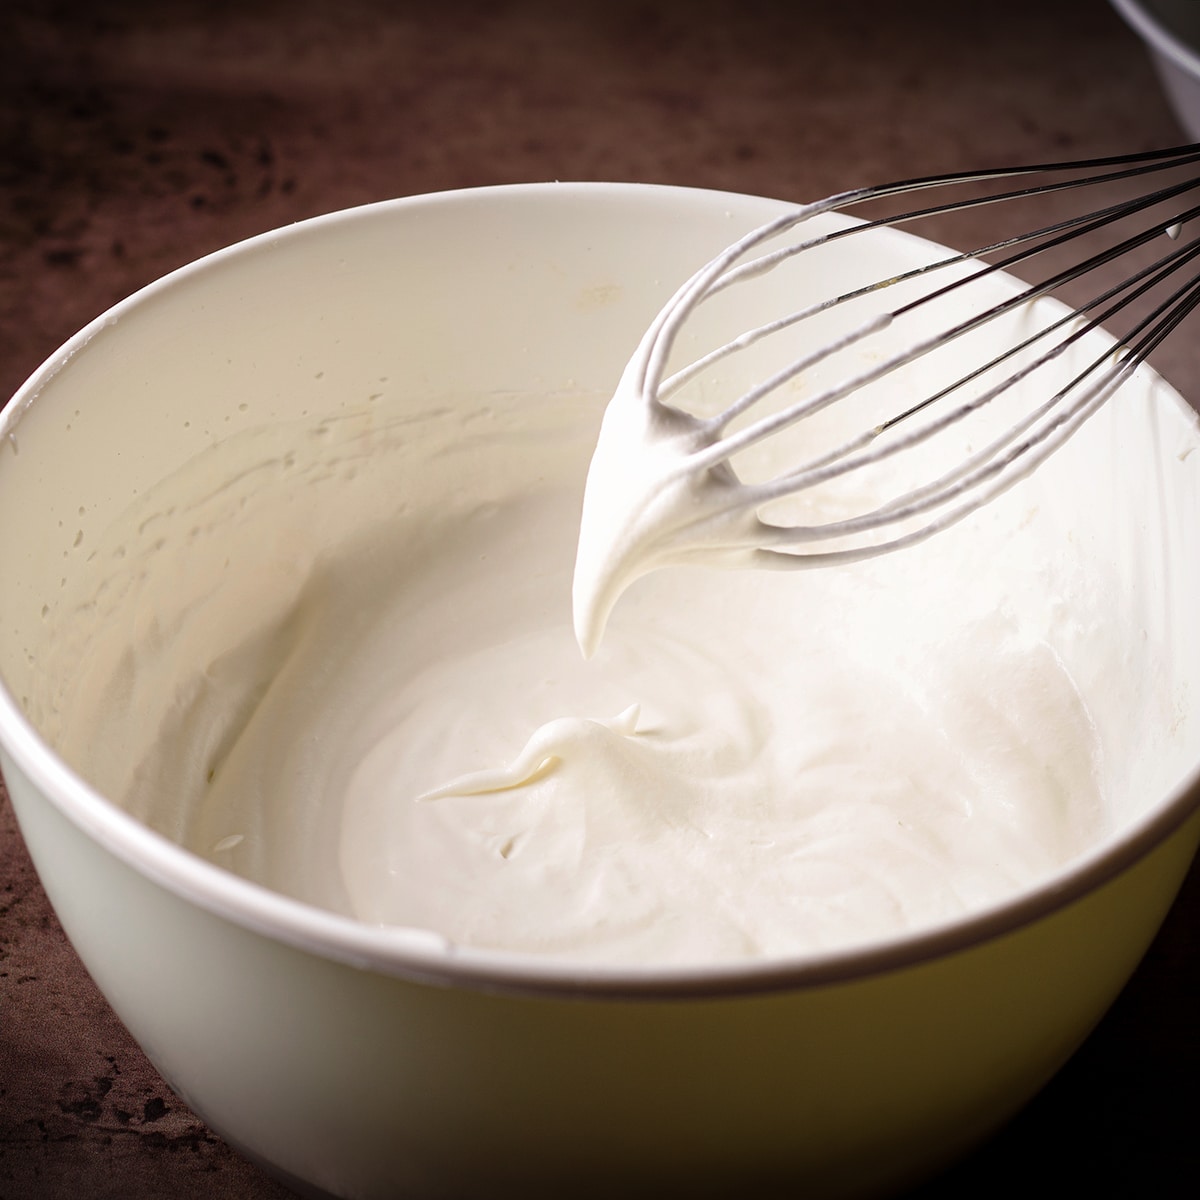 Someone lifting a whisk from a bowl of whipped cream to show that it's at the soft peak stage.